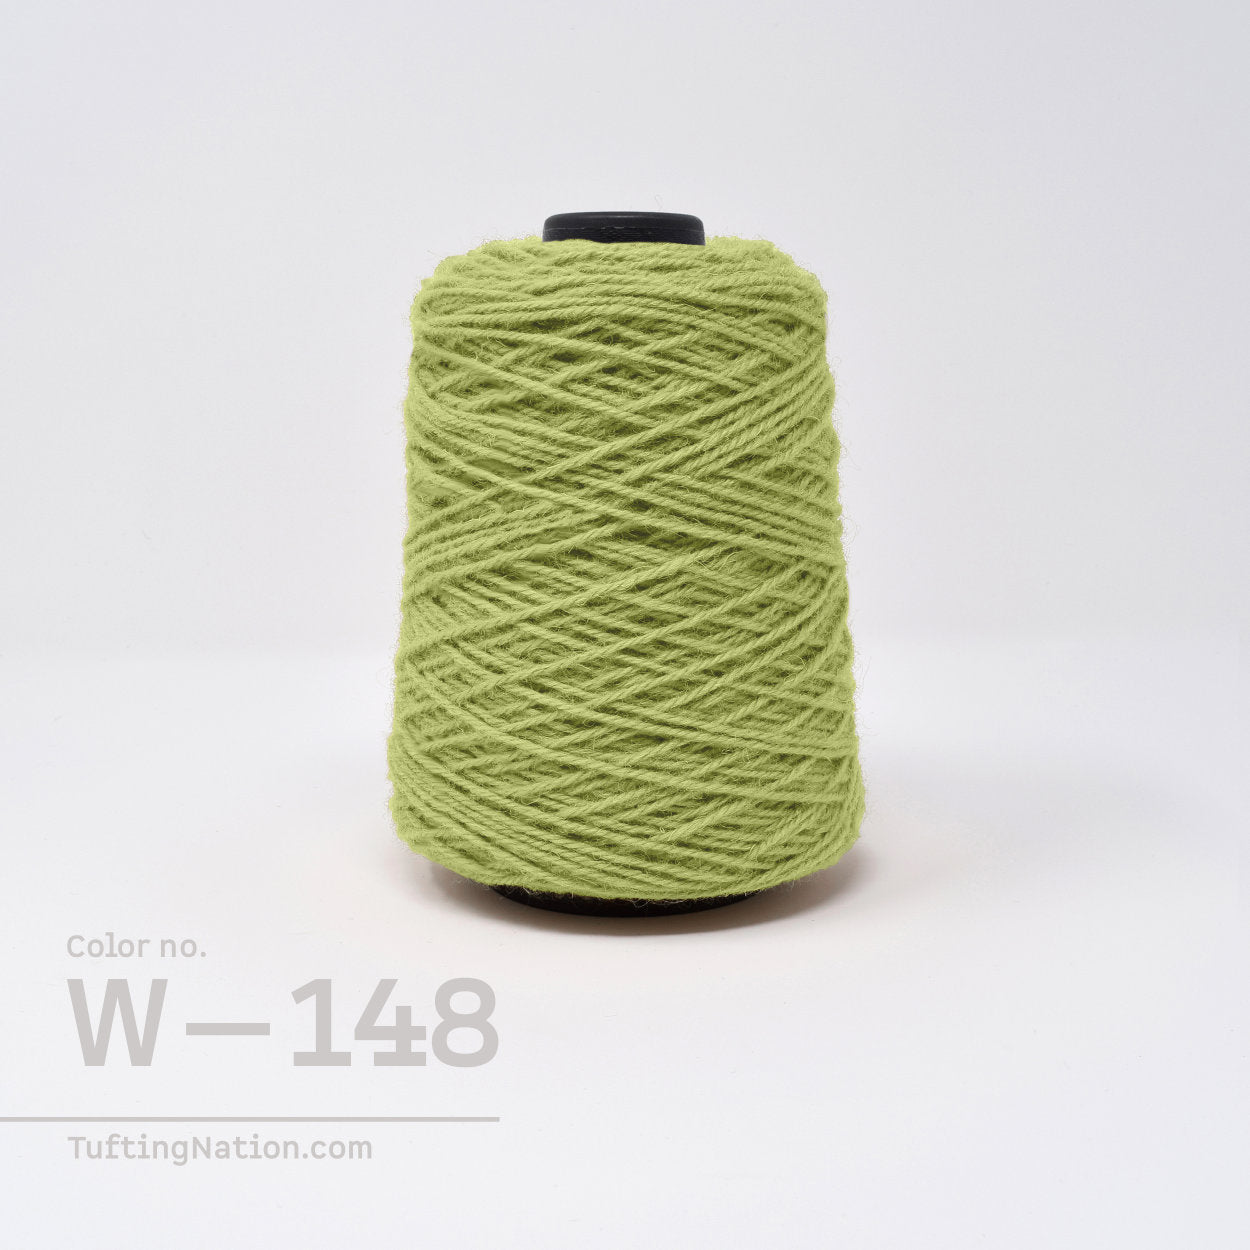 Green Tufting Gun Yarn on cones for Rug Making, Weaving and Punch Needle | TuftingNation